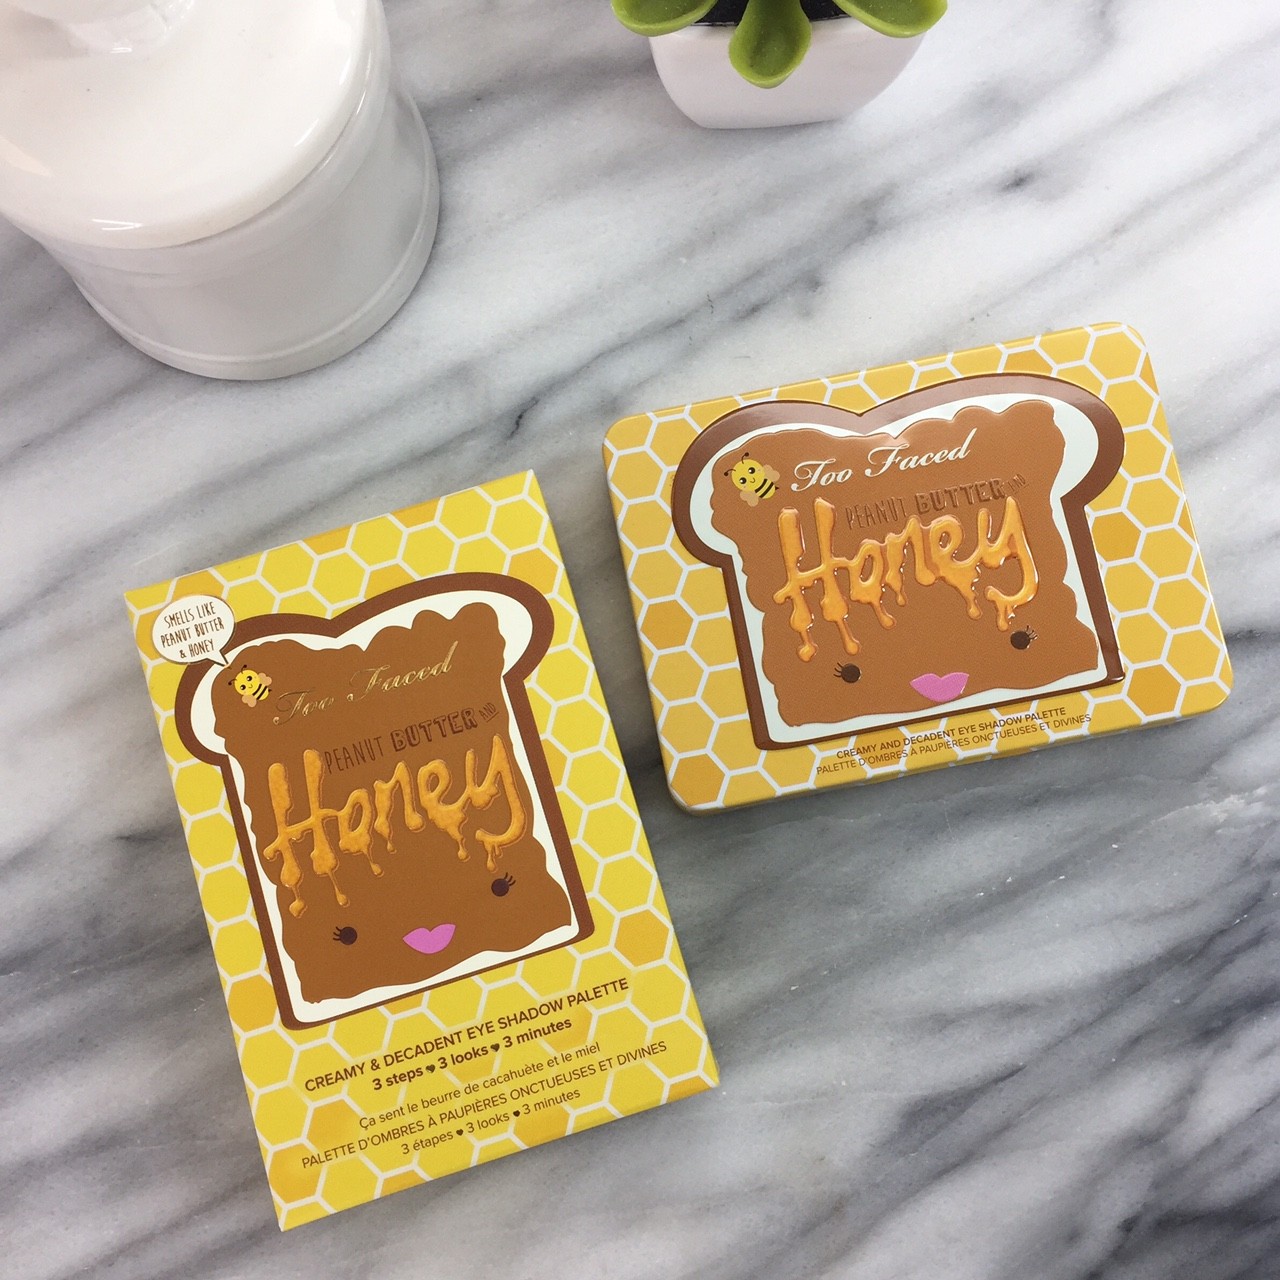 Too Faced Peanut Butter and Honey Palette